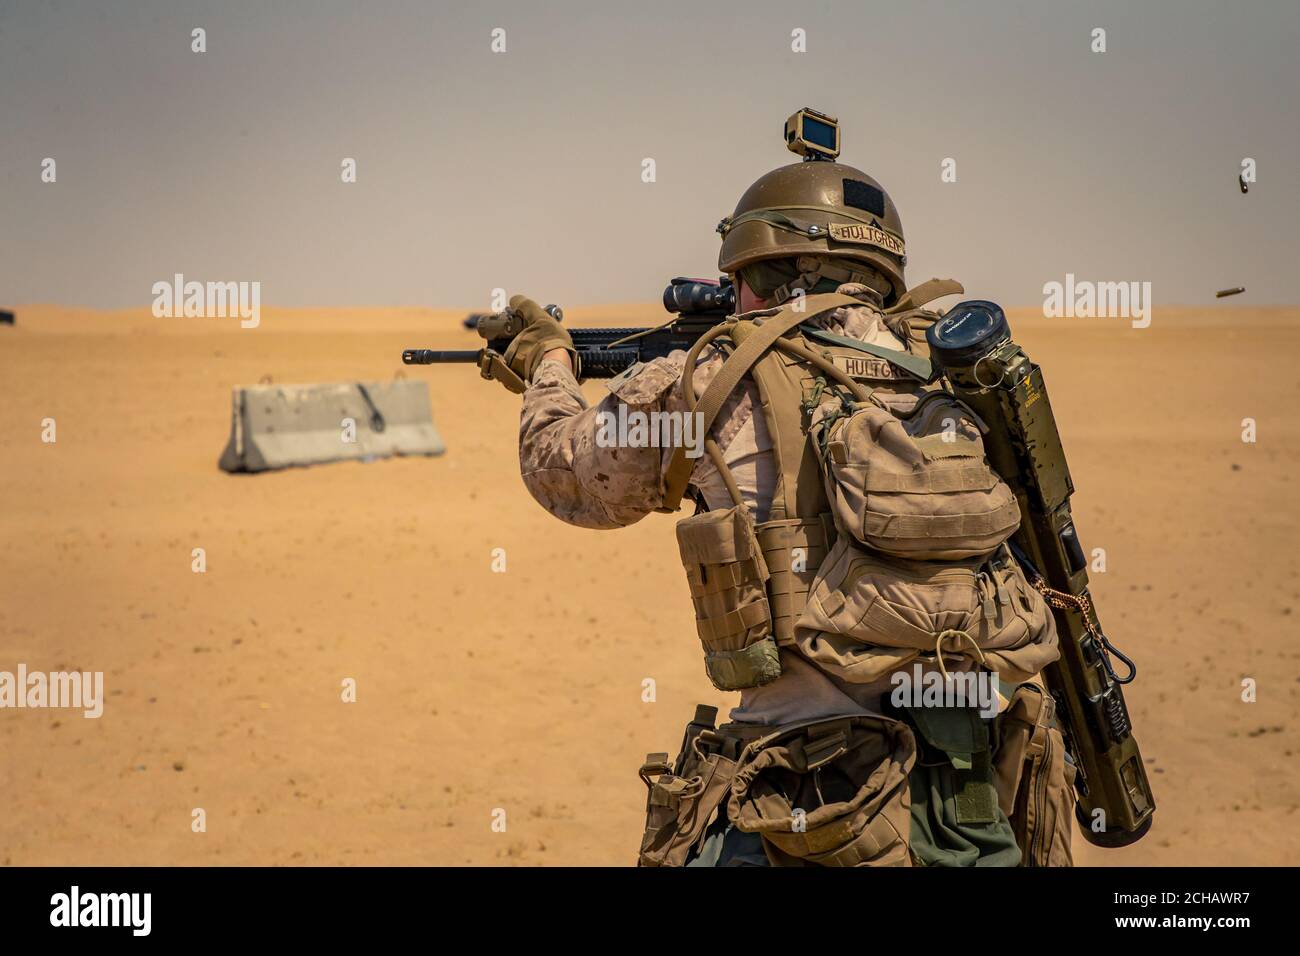 A U.S. Marine with 2nd Battalion, 5th Marine Regiment, with Special Purpose Marine Air-Ground Task Force Crisis Response - Central Command 20.2, engages targets with his M27 infantry automatic rifles during an anti-armor range in Kuwait, Sept. 3, 2020. The training focused on integrating anti-armor capabilities at the platoon level. The SPMAGTF-CR-CC is a crisis response force, prepared to deploy a variety of capabilities across the region. (U.S. Marine Corps photo by Lance Cpl. Andrew Skiver) Stock Photo